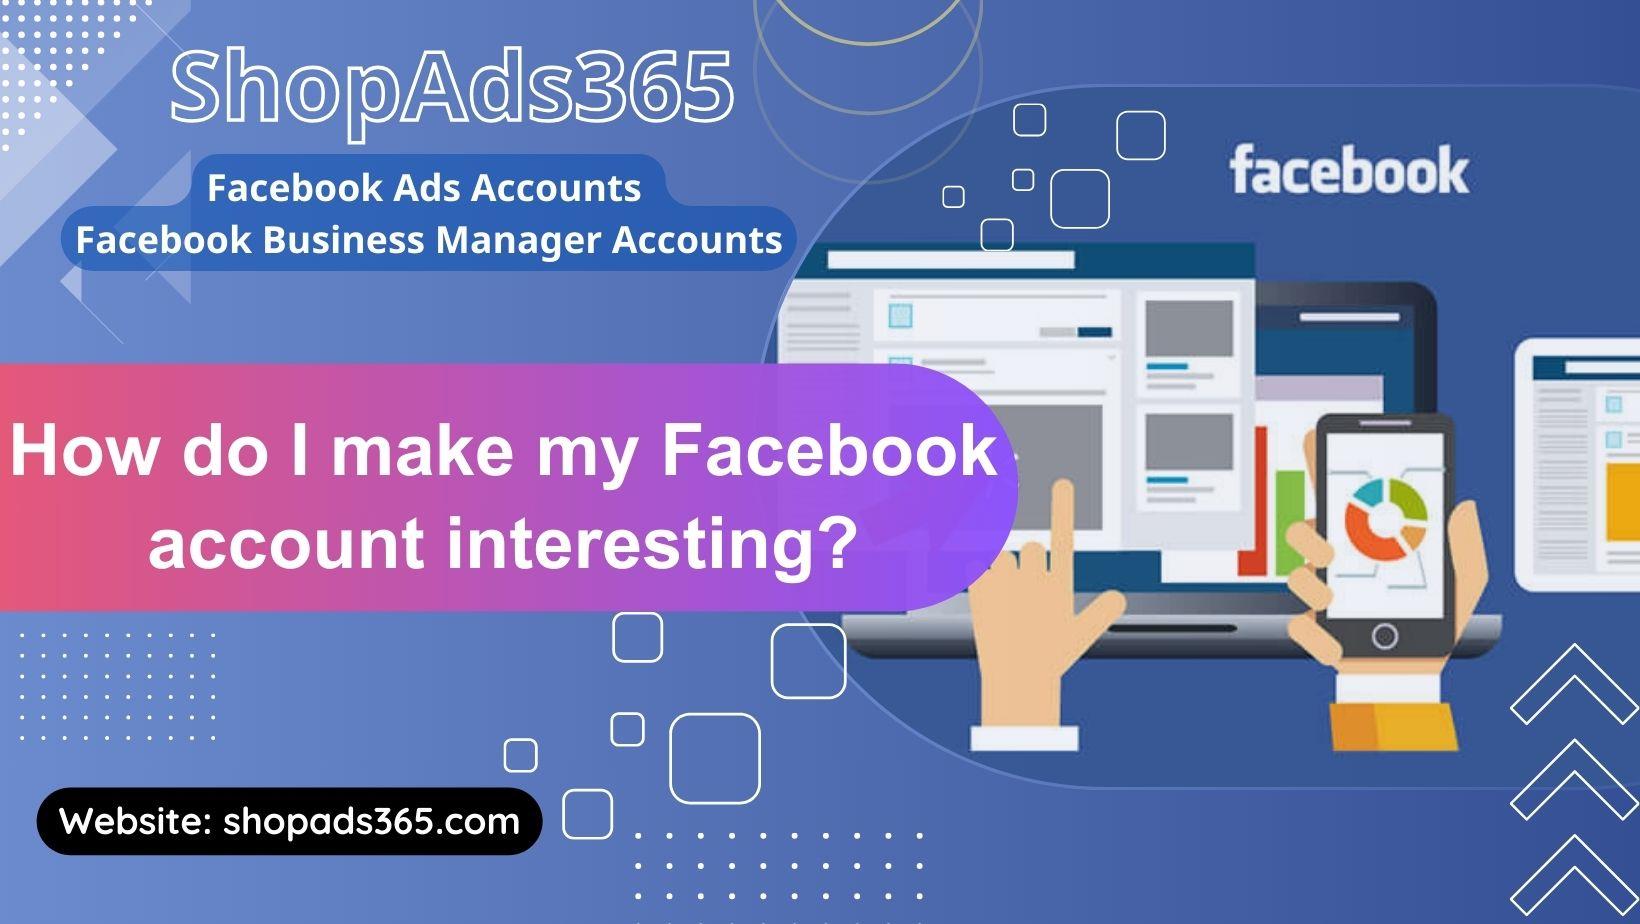 Strategies to Make Your Facebook Account More Interesting